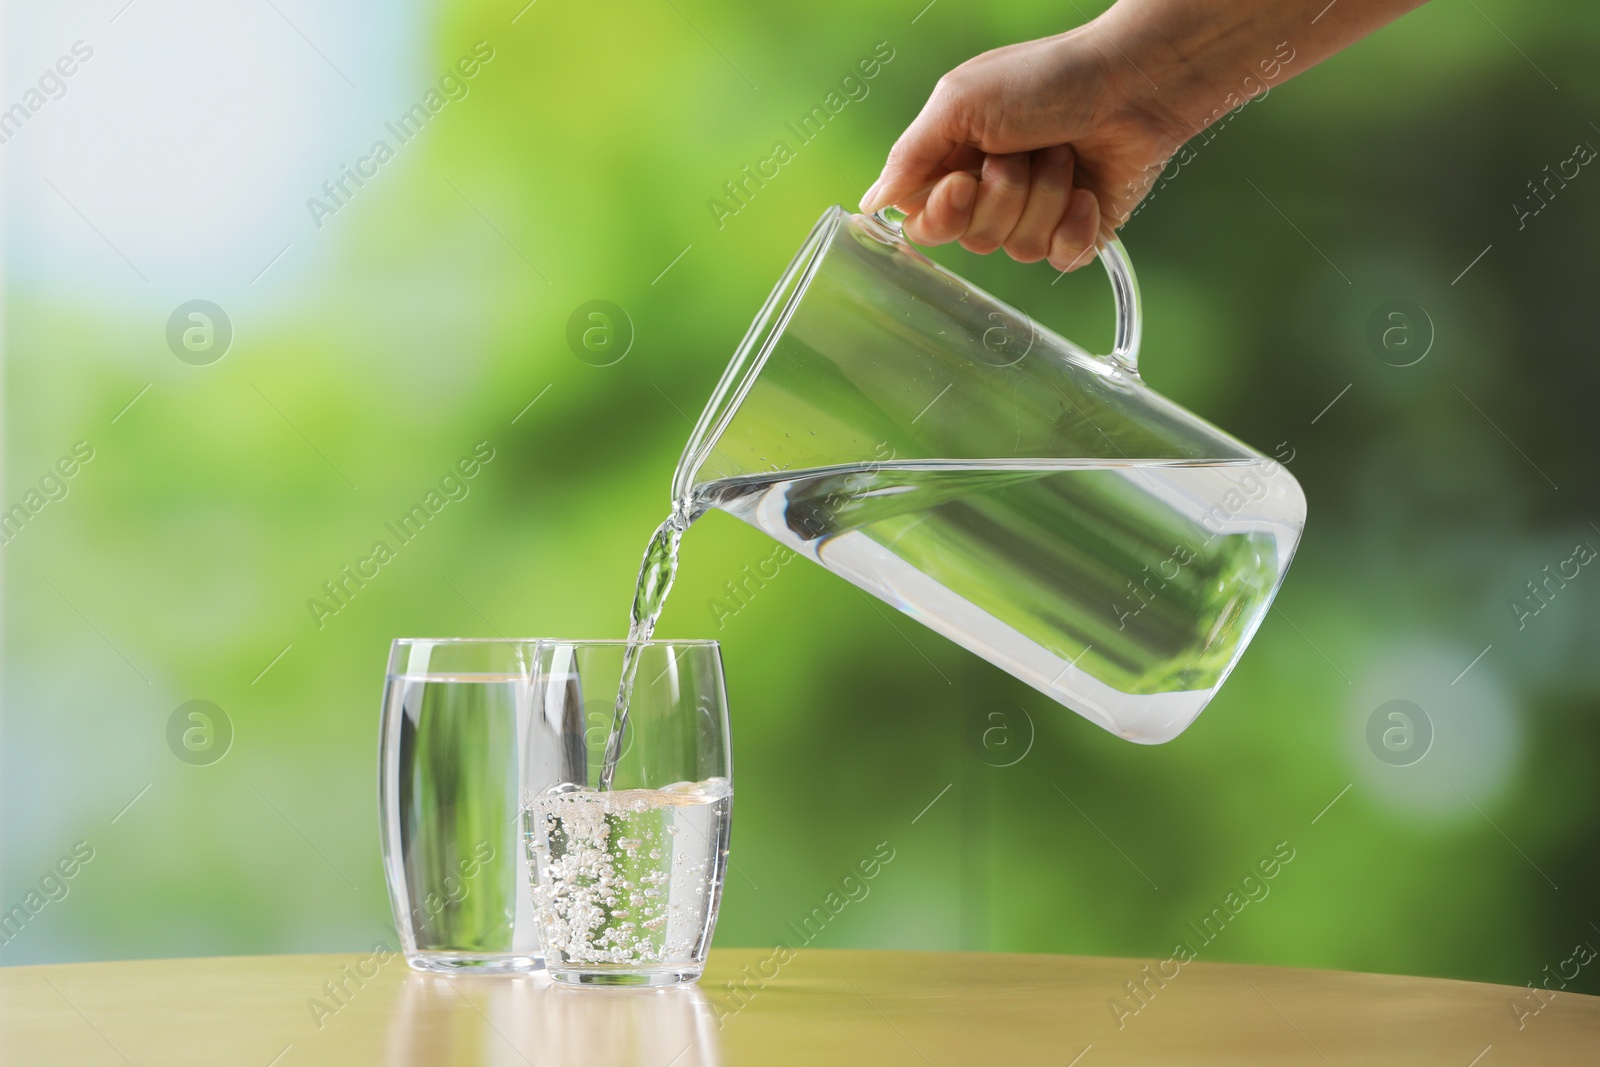 Photo of Woman pouring fresh water from jug into glass at wooden table against blurred green background, closeup